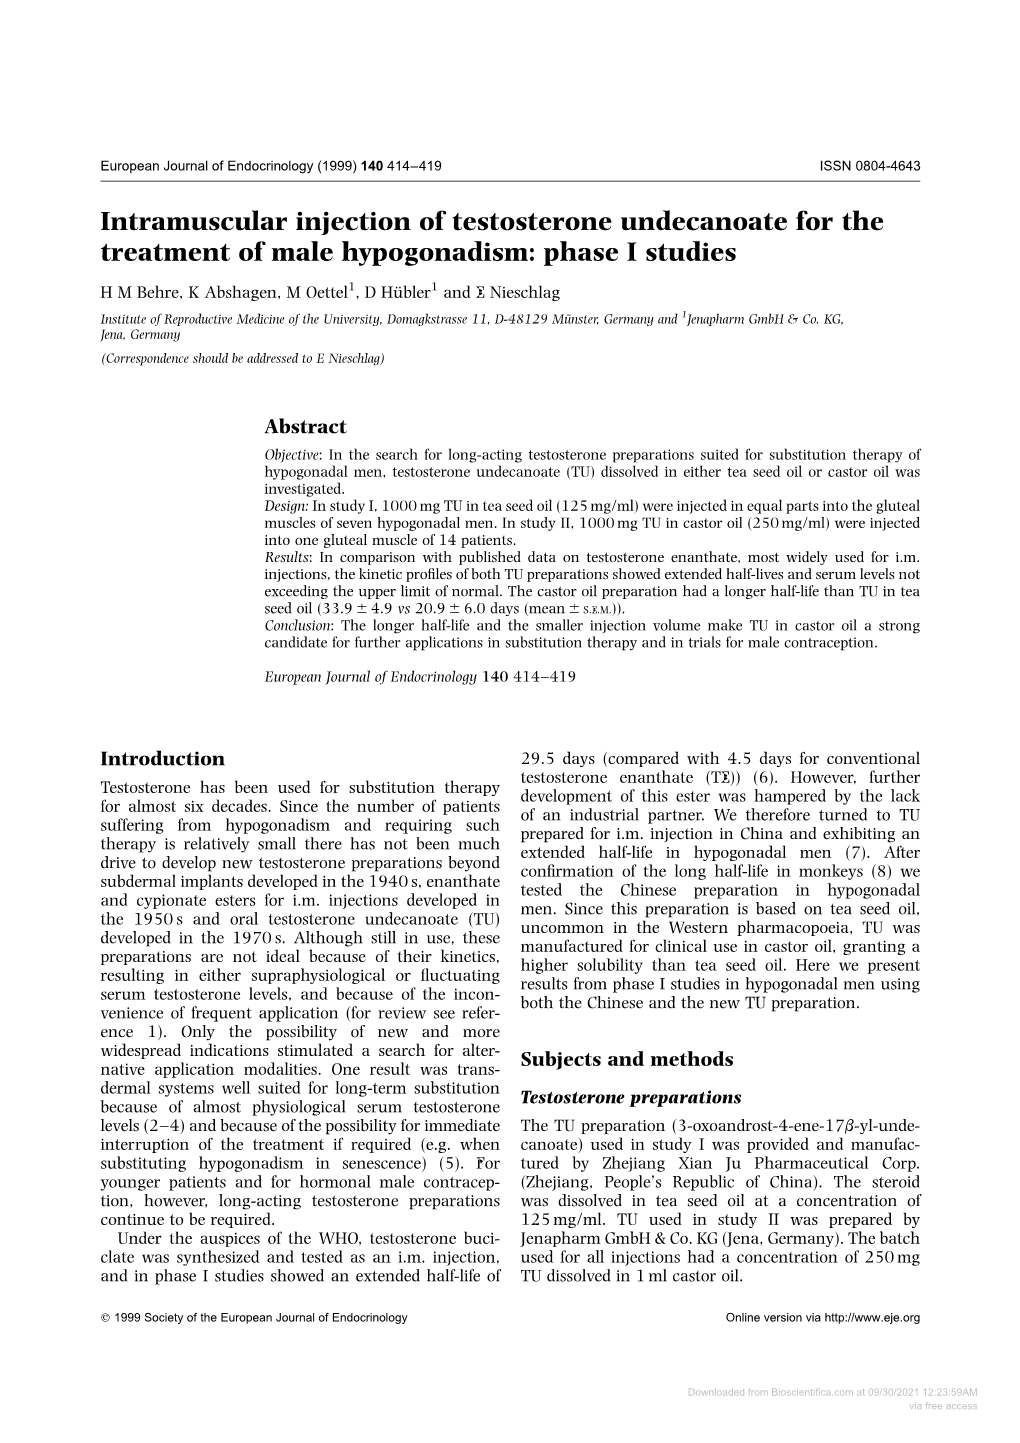 Intramuscular Injection of Testosterone Undecanoate for the Treatment of Male Hypogonadism: Phase I Studies